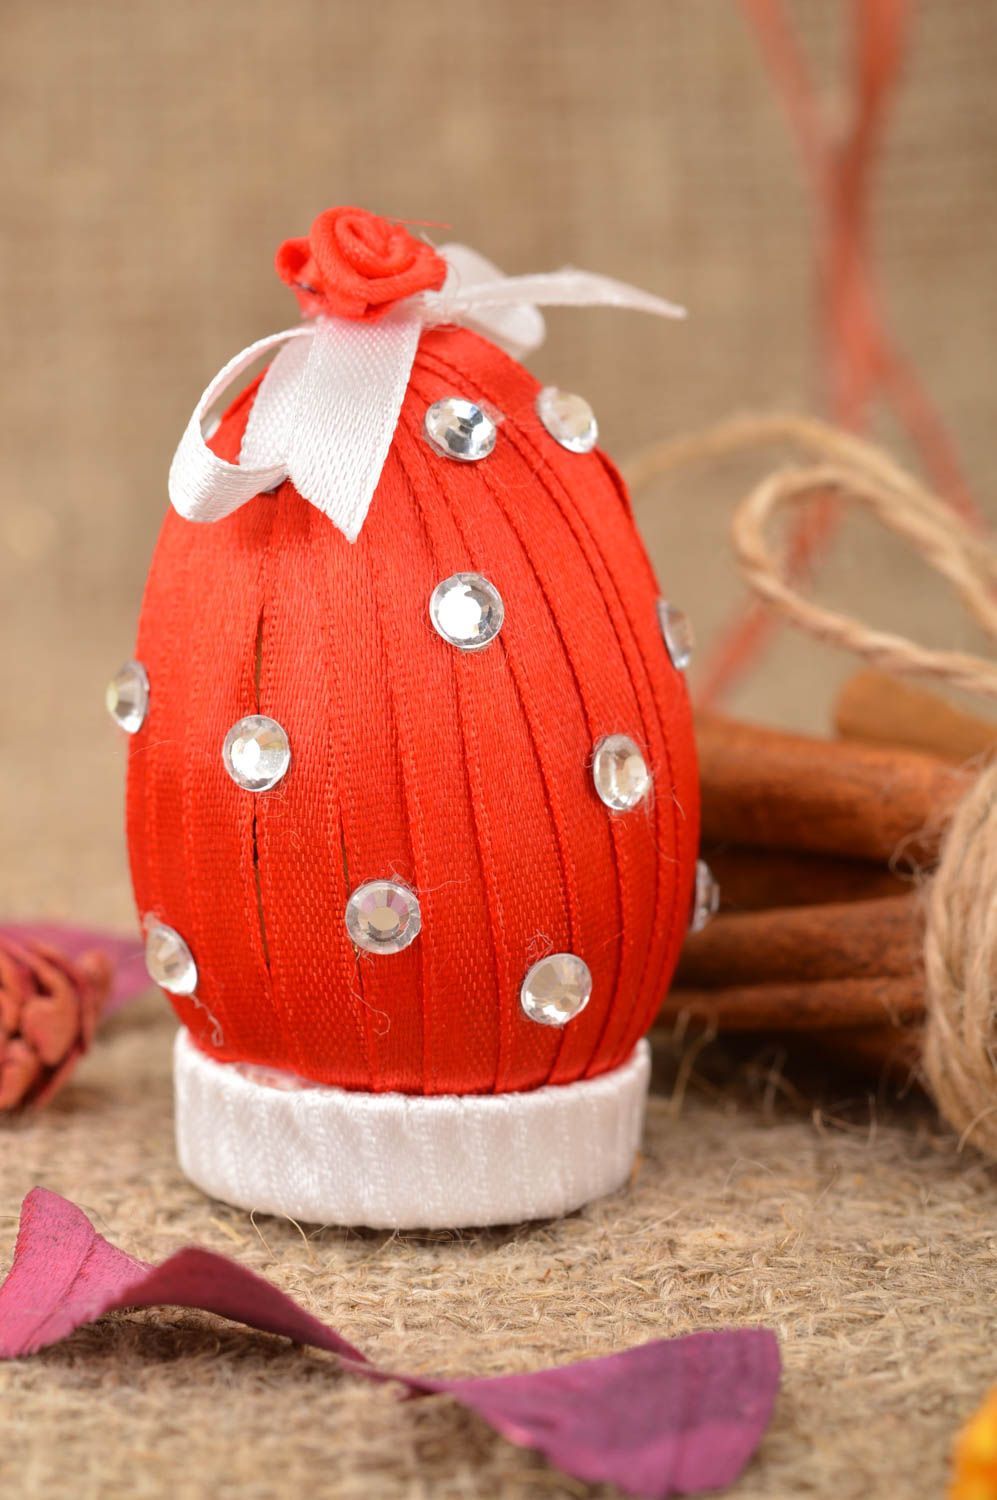 Handmade decorative interior Easter egg with red ribbons and rhinestones photo 1